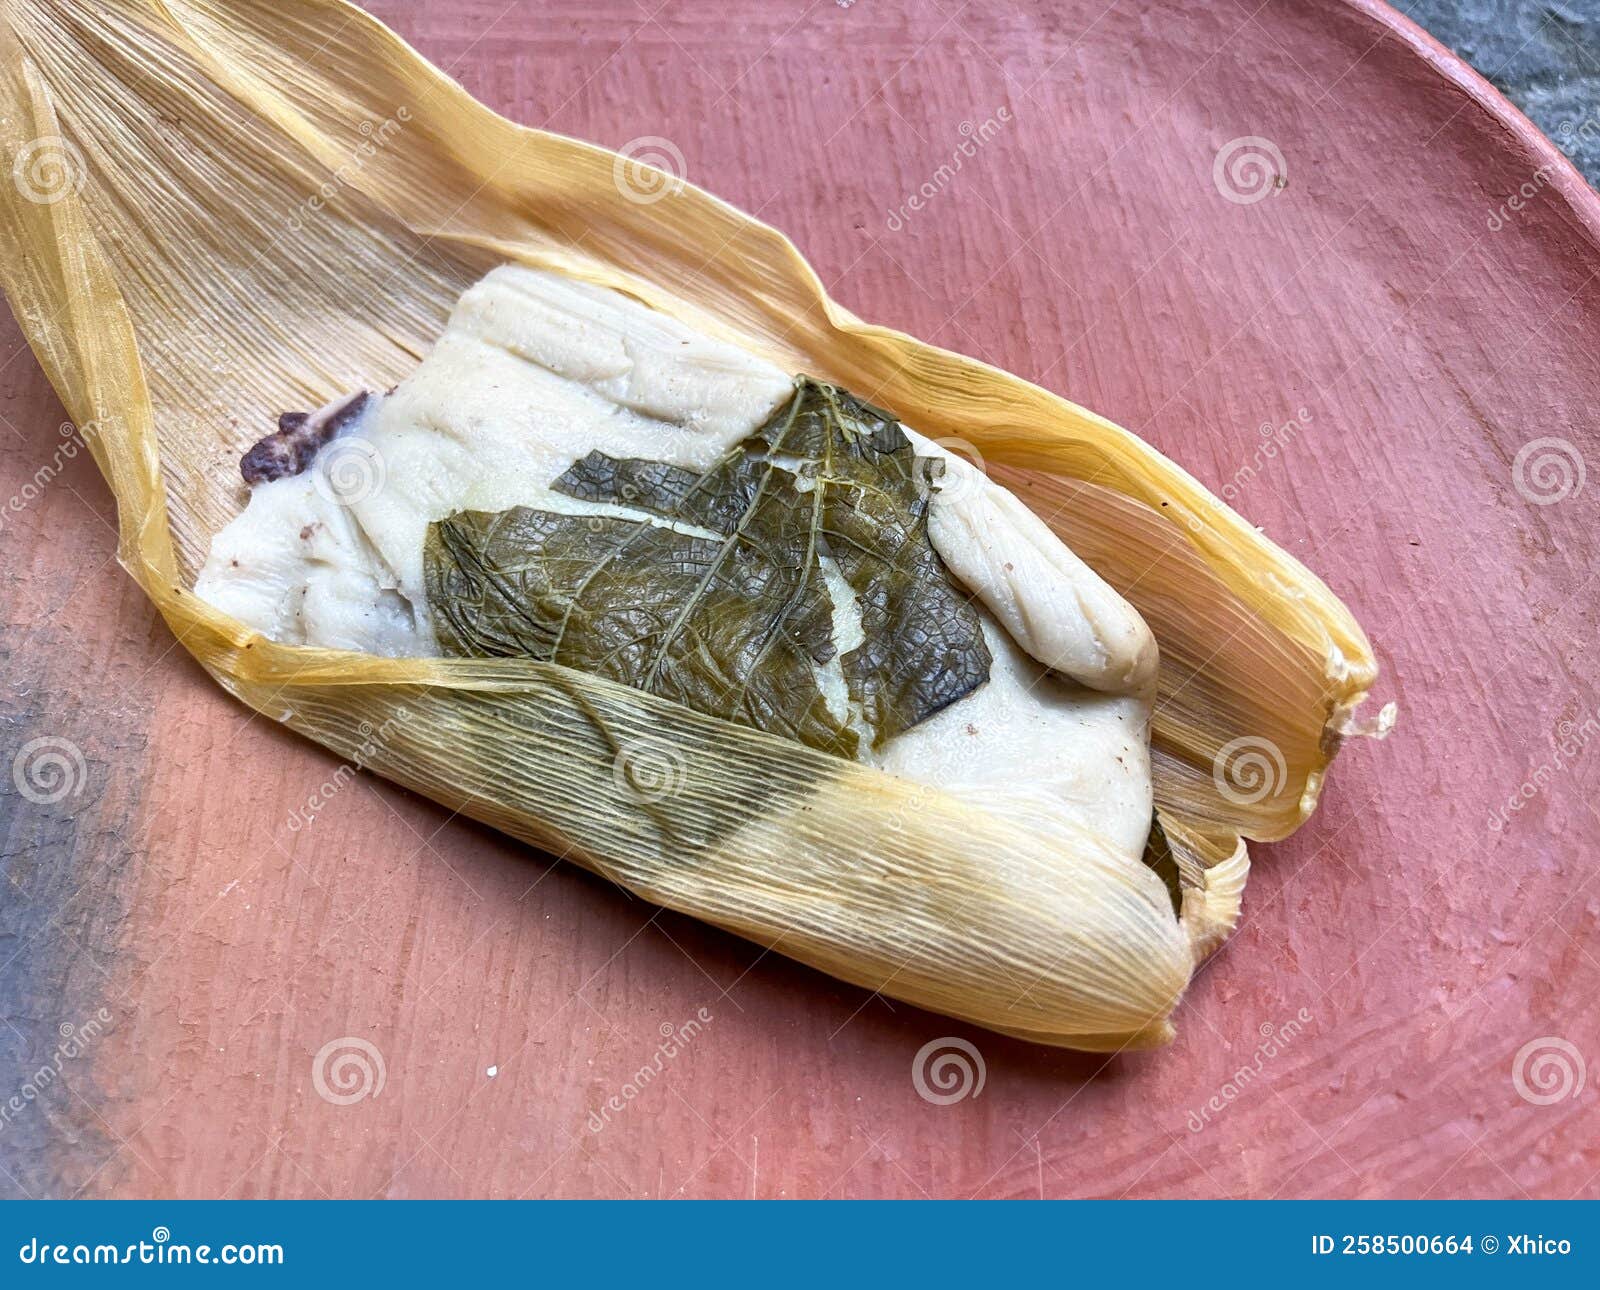 one oaxacan tamale with hoja santa wrapped on the outside of the masa